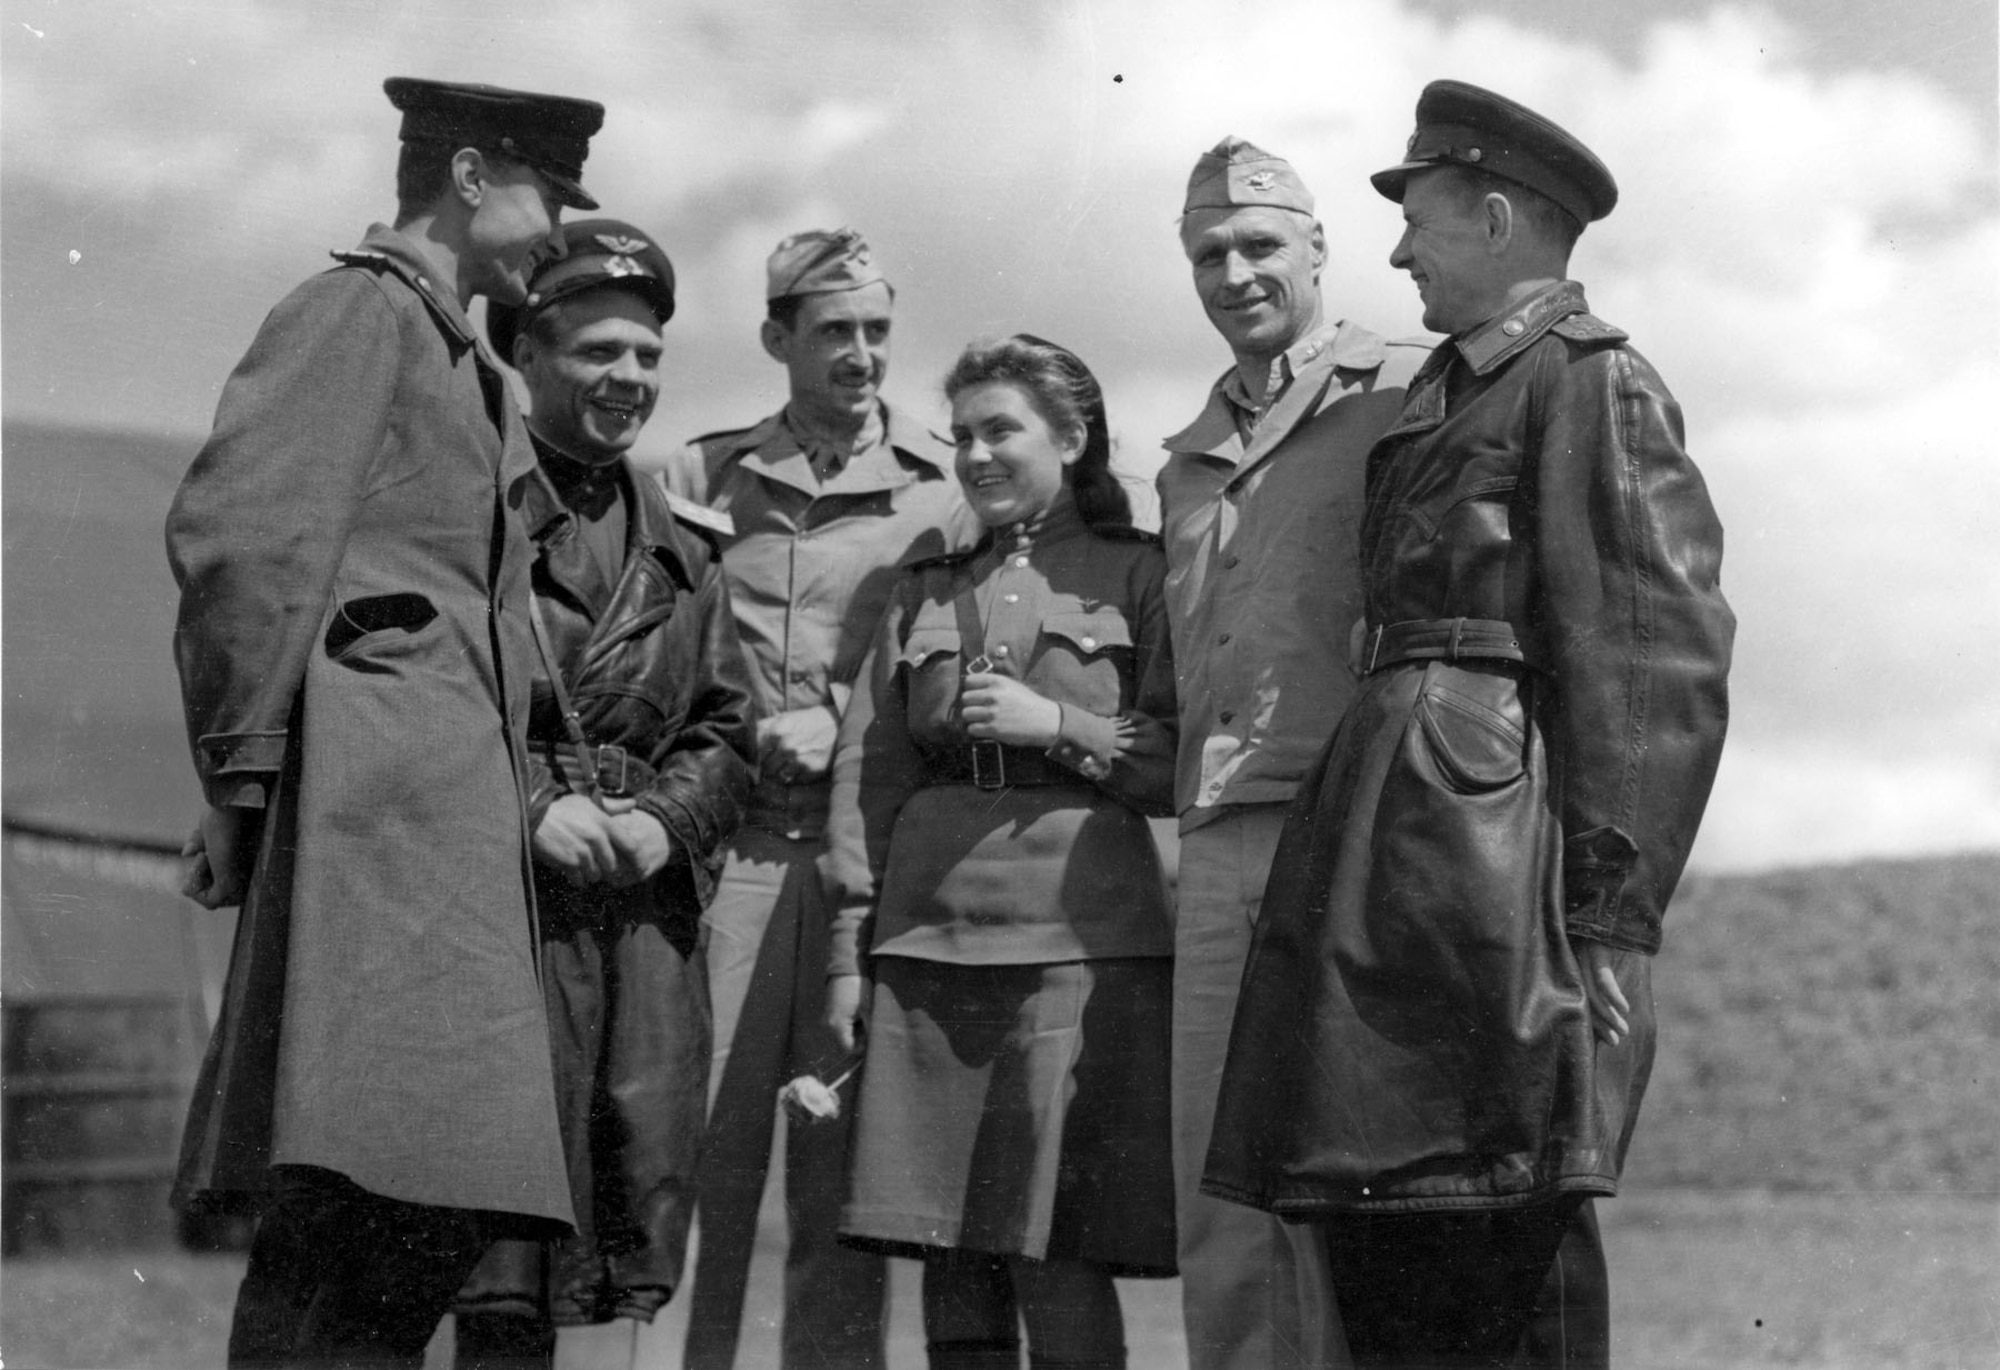 Russian officers chat with Col. Barton, commanding officer of the 483rd Bomb Group, and Col. Rice of the 2nd Bomb Group at Mirgorod. The girl in the center is an interpreter. (U.S. Air Force photo)